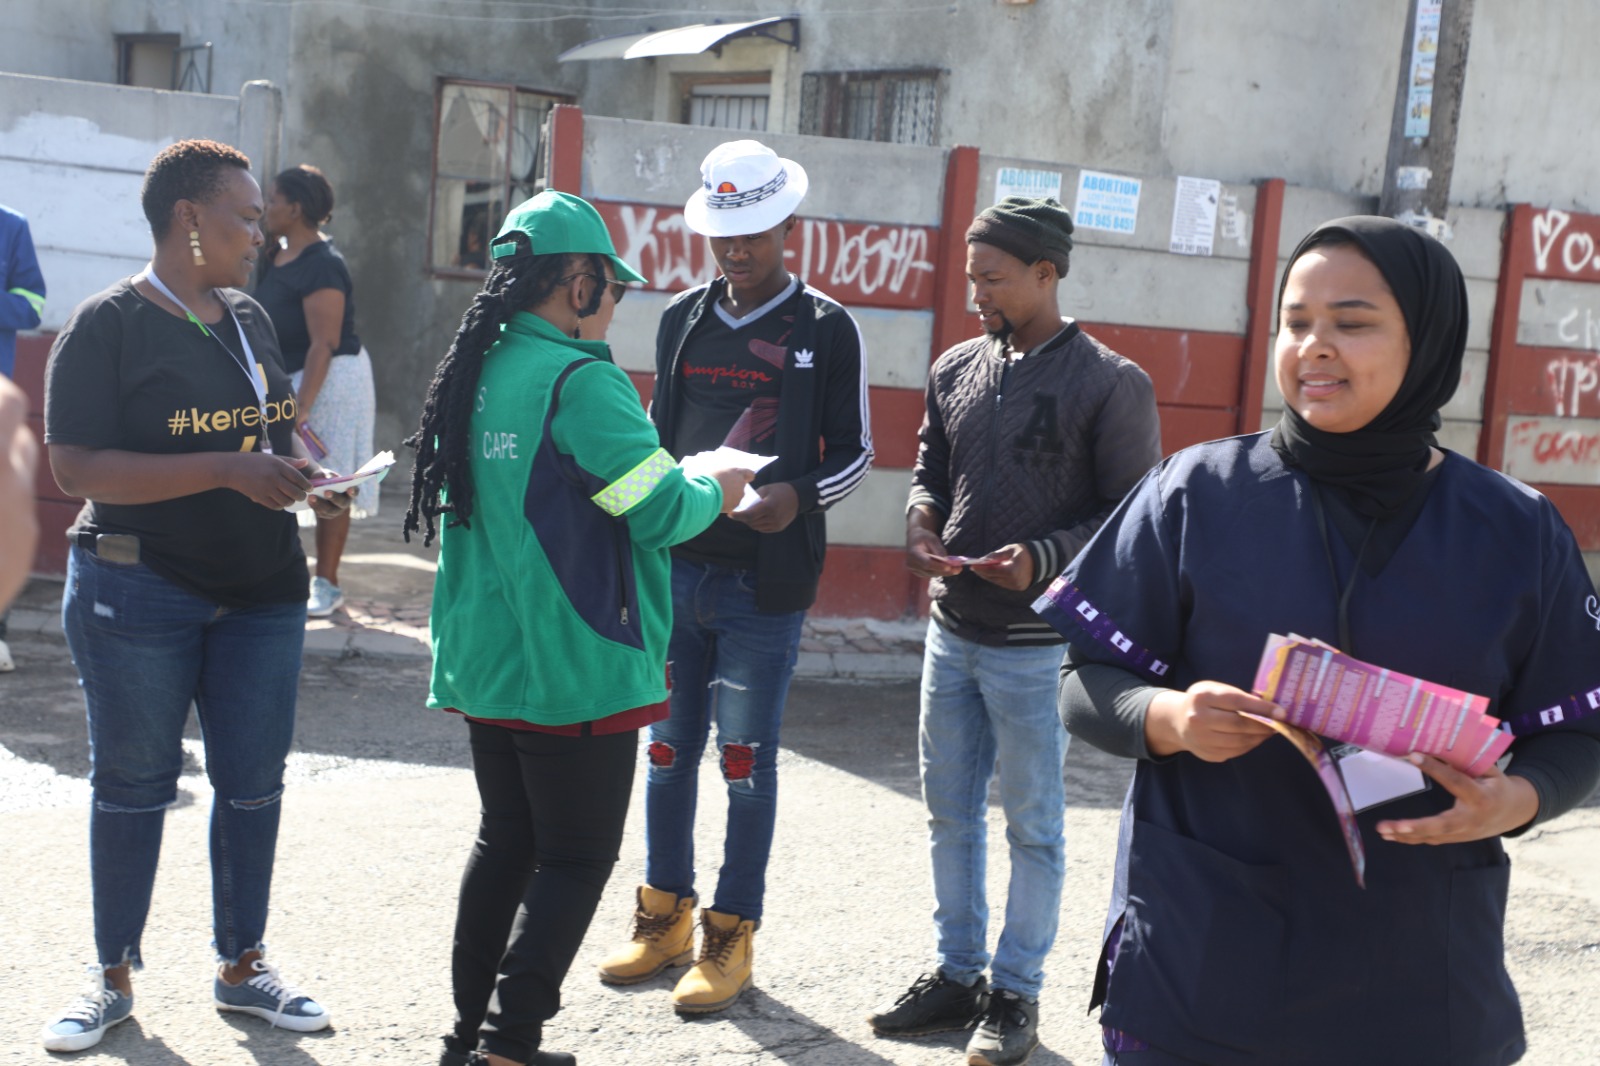 Minister Mbombo engaging residents in Du Noon and raising awareness for the services offered at the Wellness Hub.